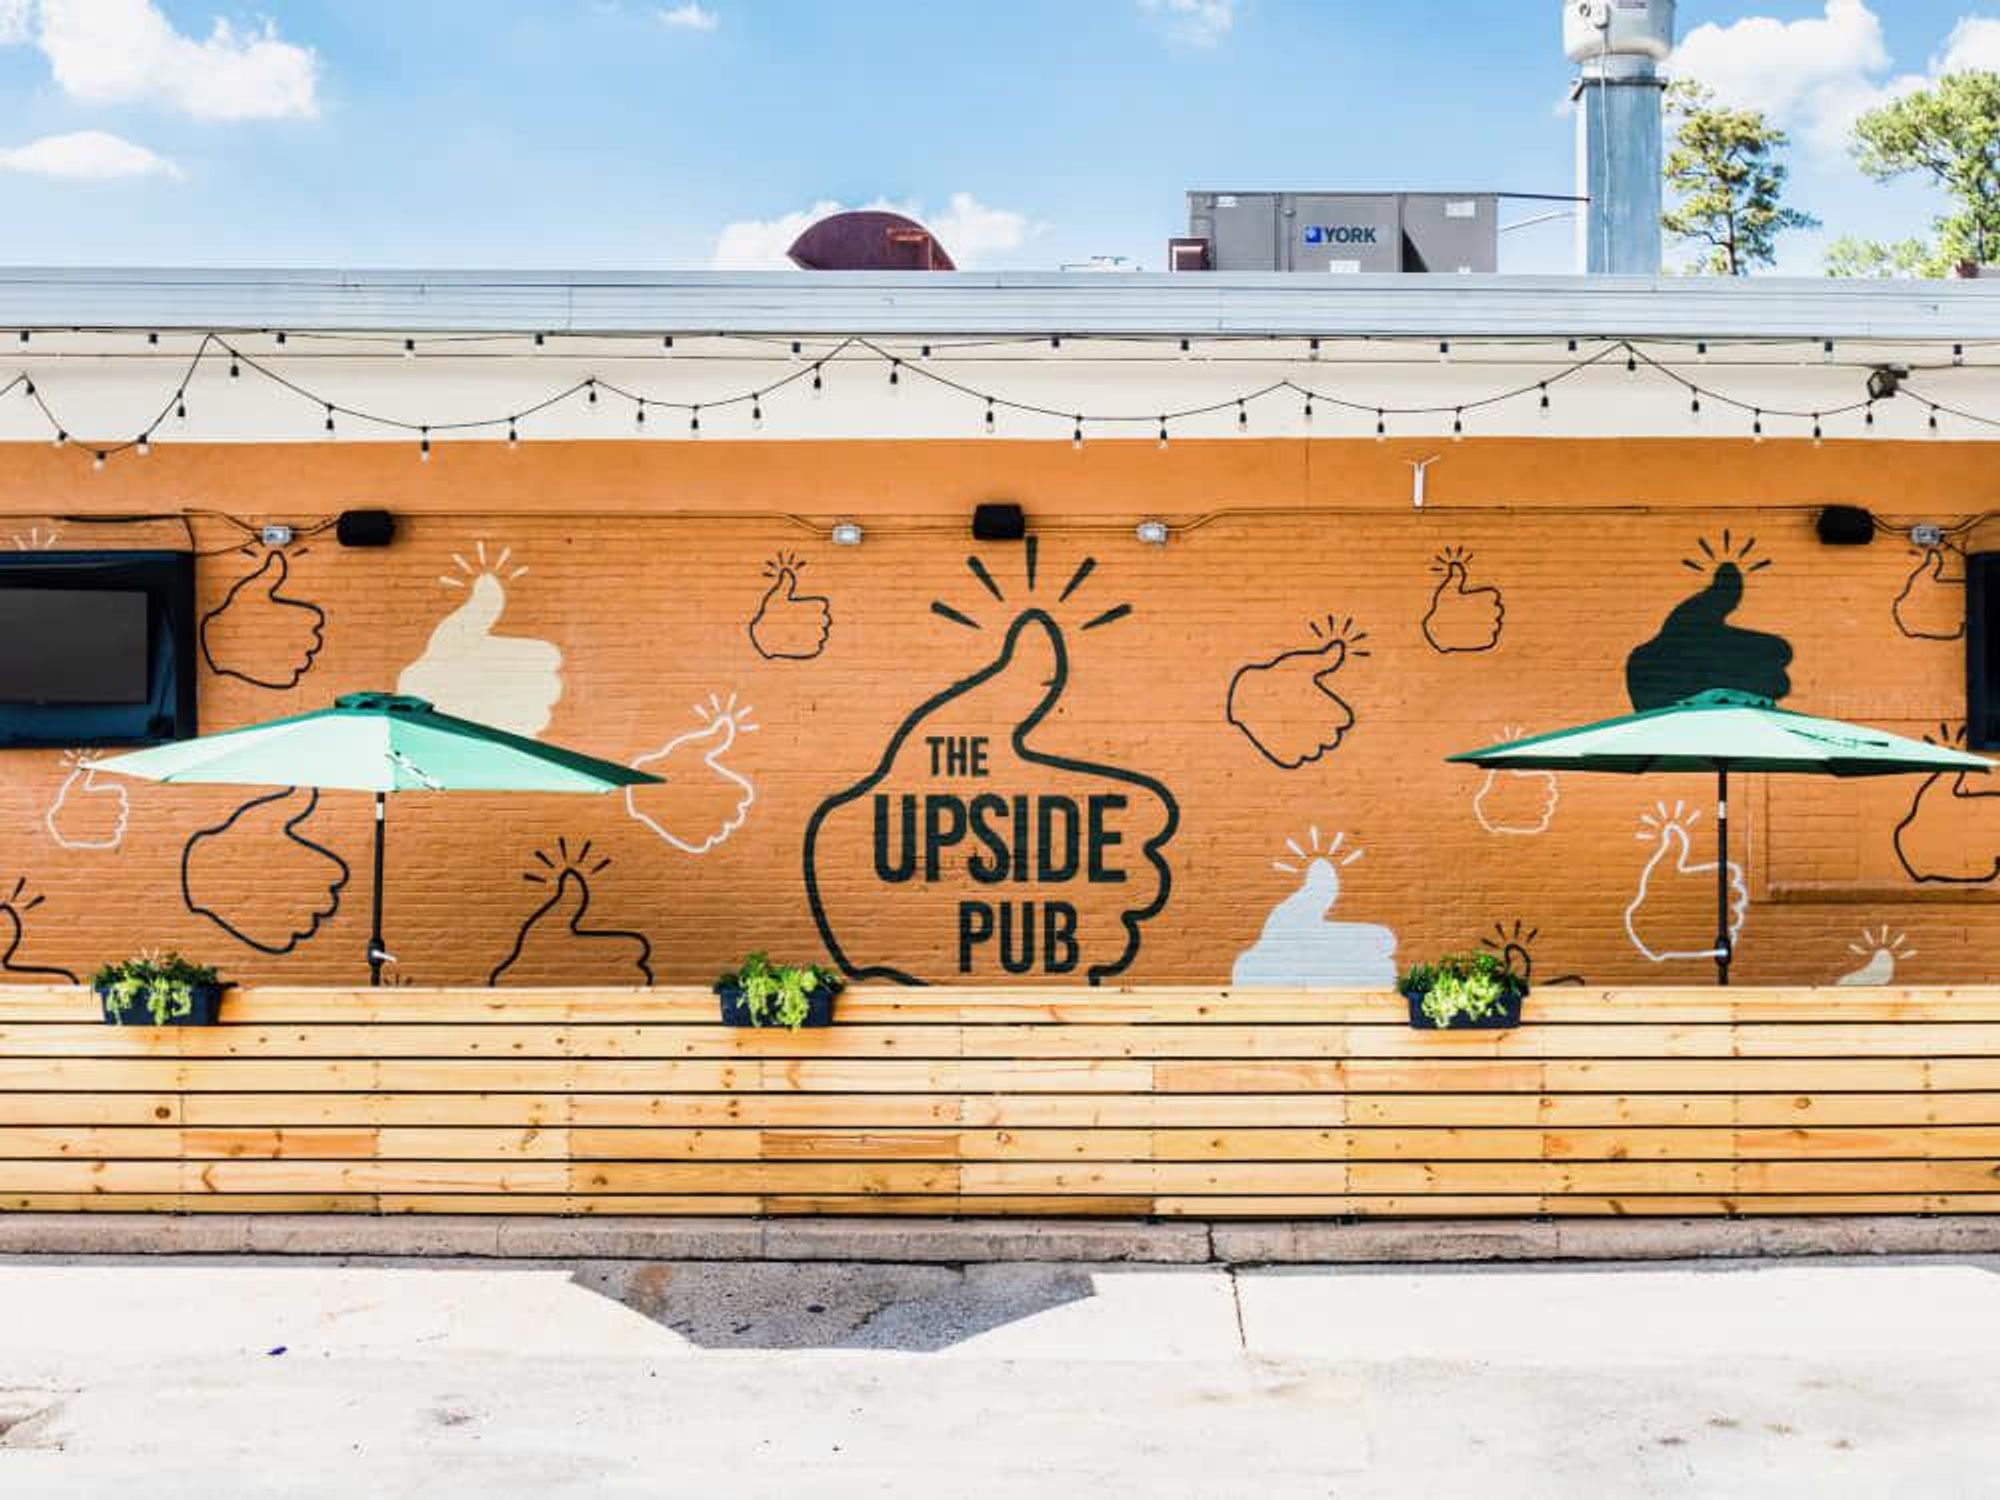 The Upside Pub opens August 9.